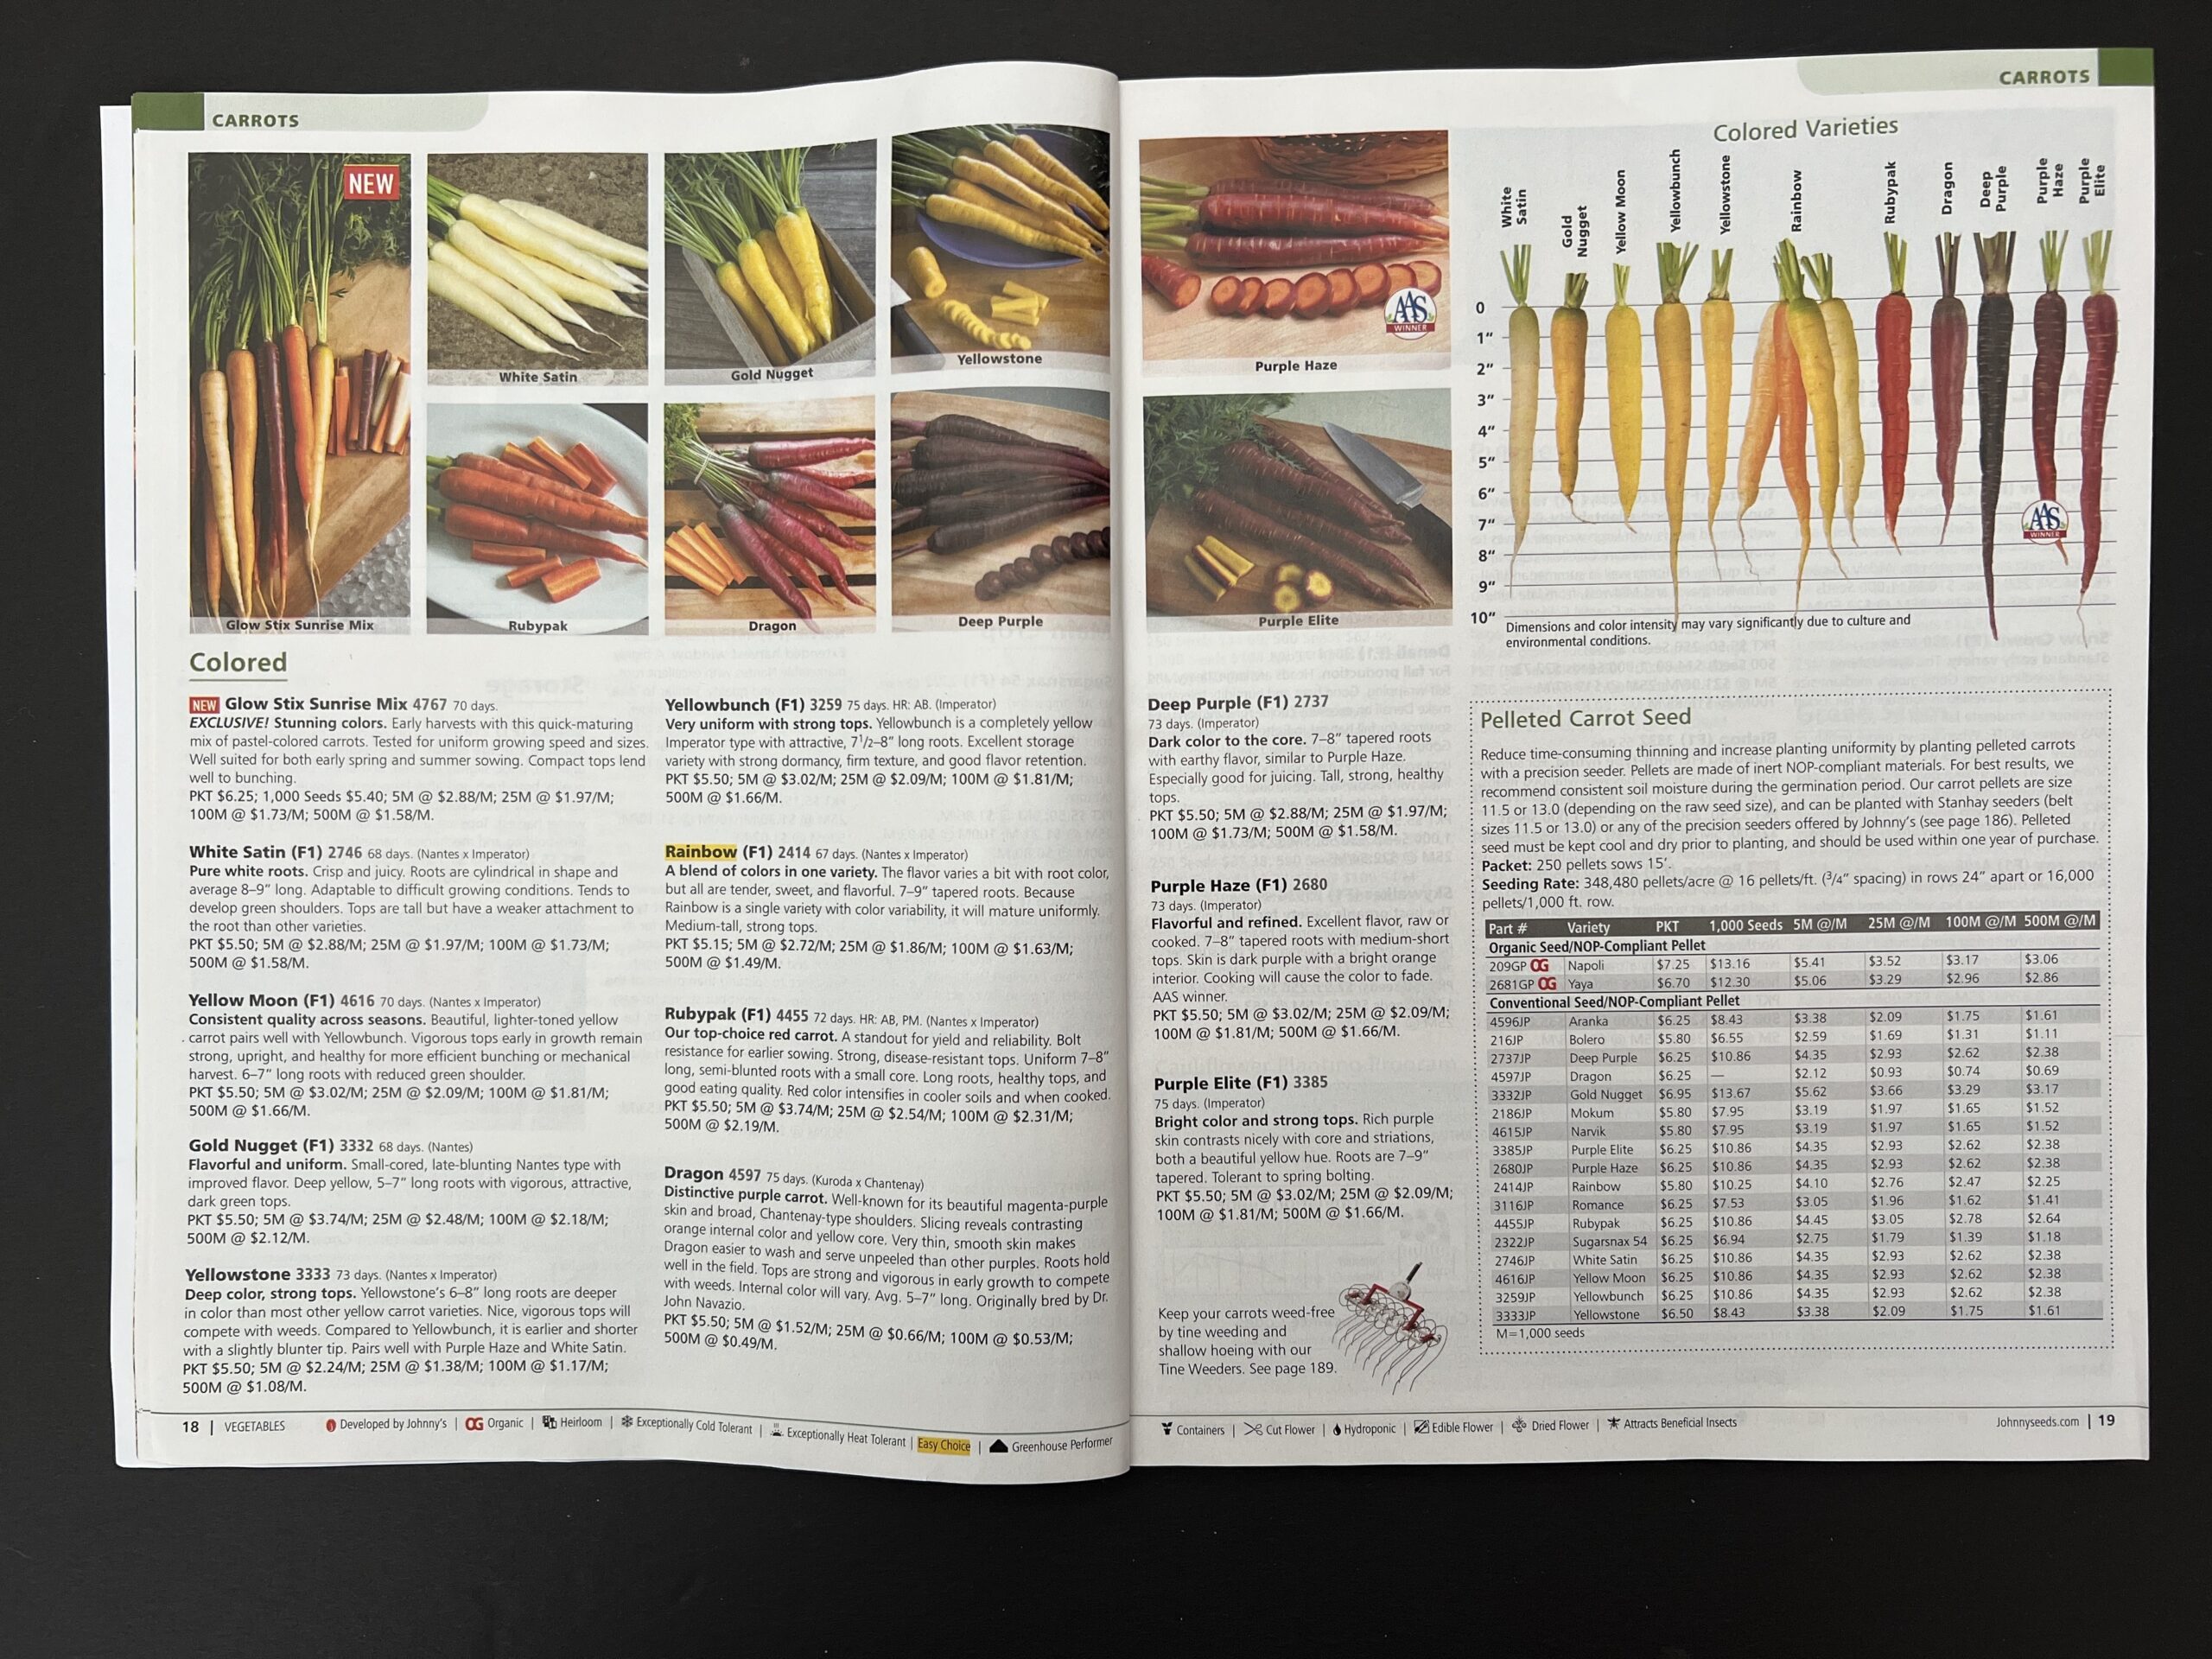 Colored carrots offer variety in taste as well. The chart on the right top shows both length and color while the chart on the bottom shows organic and conventional seed that are available as pellets. Much easier to sow than straight seed. ANDREW MESSINGER